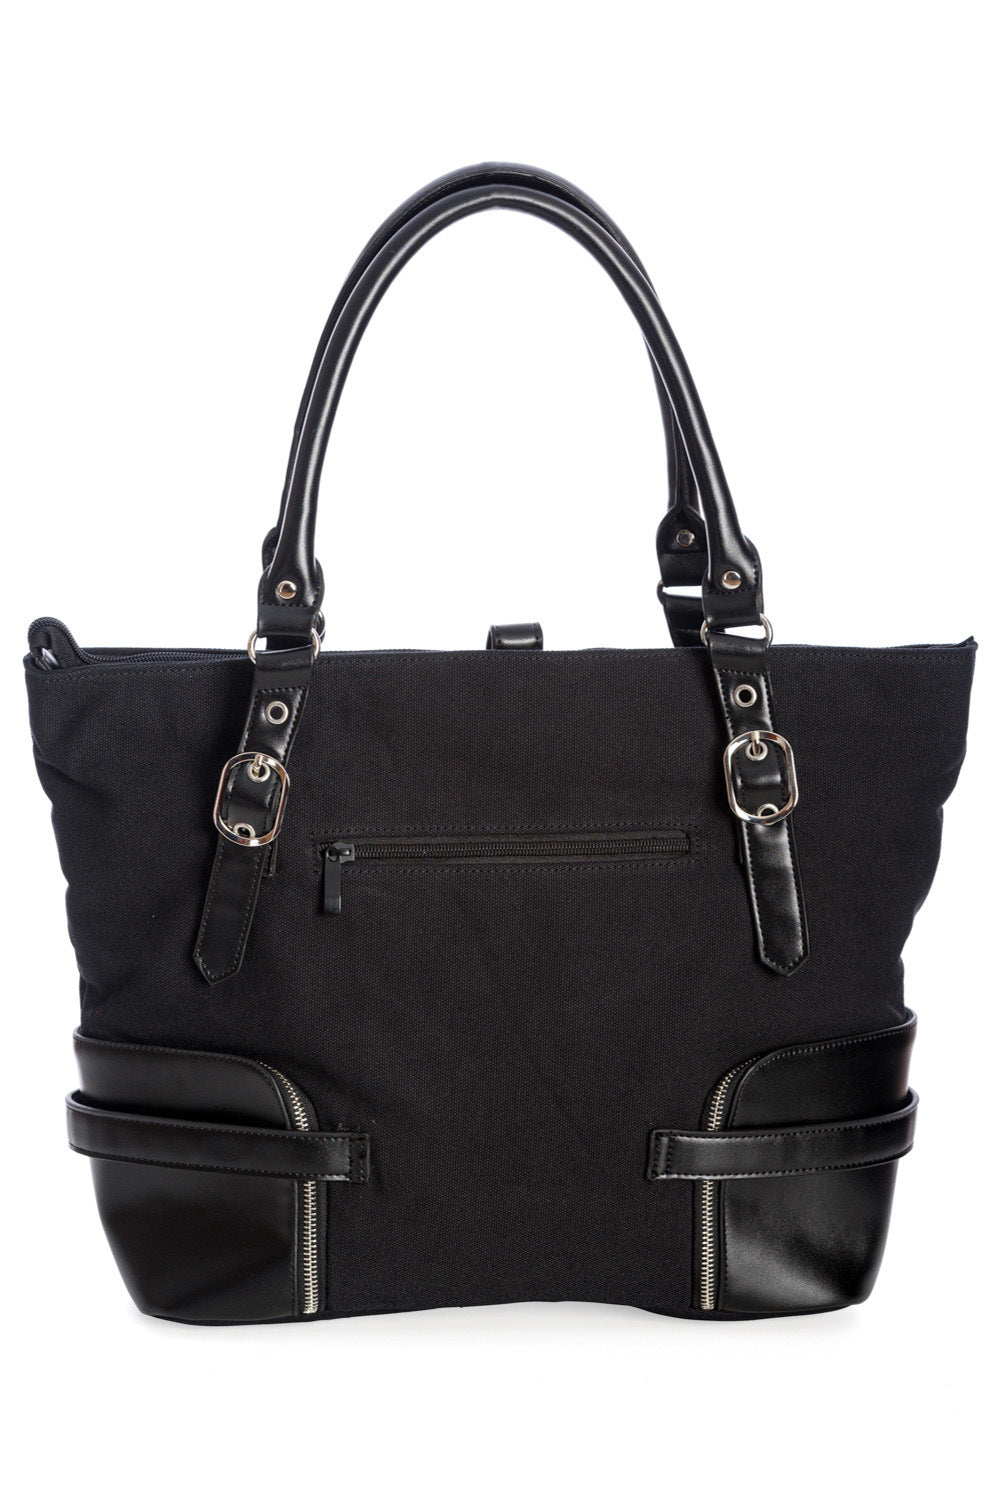 Large tote black tote bag with buckle details in the centre. 